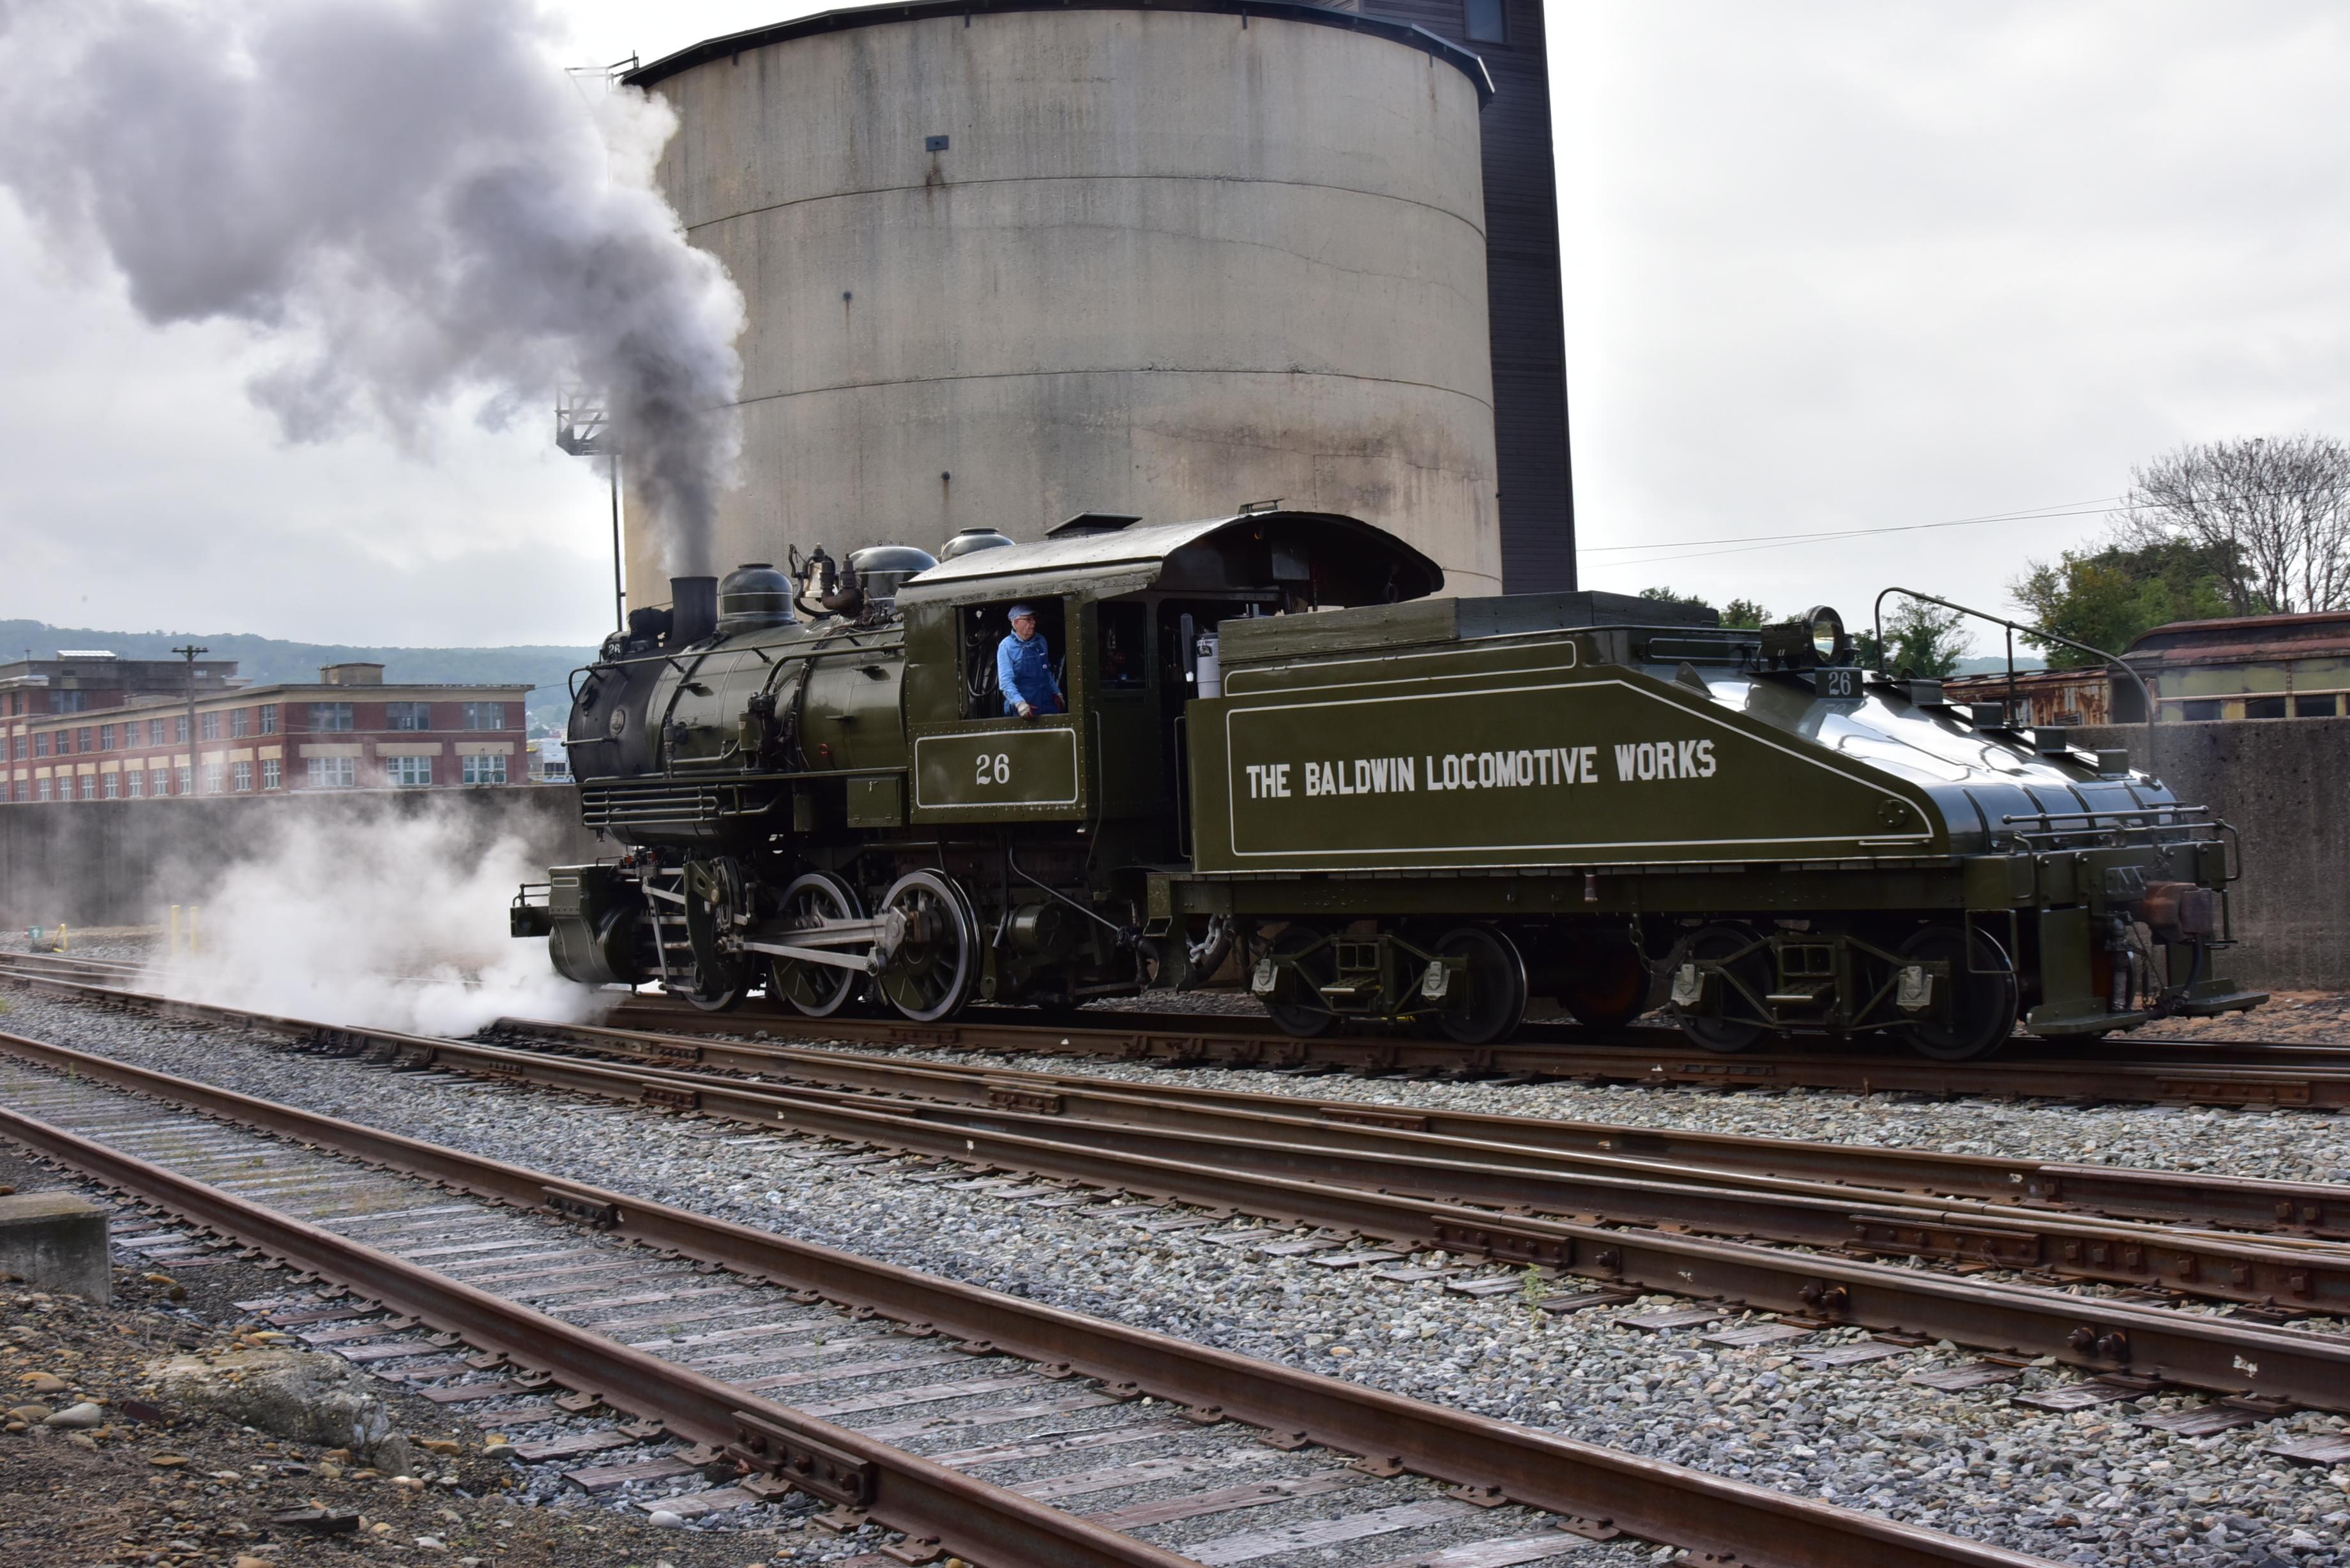 Historic Baldwin Locomotive Works engine number 26 out for a test run on the tracks.